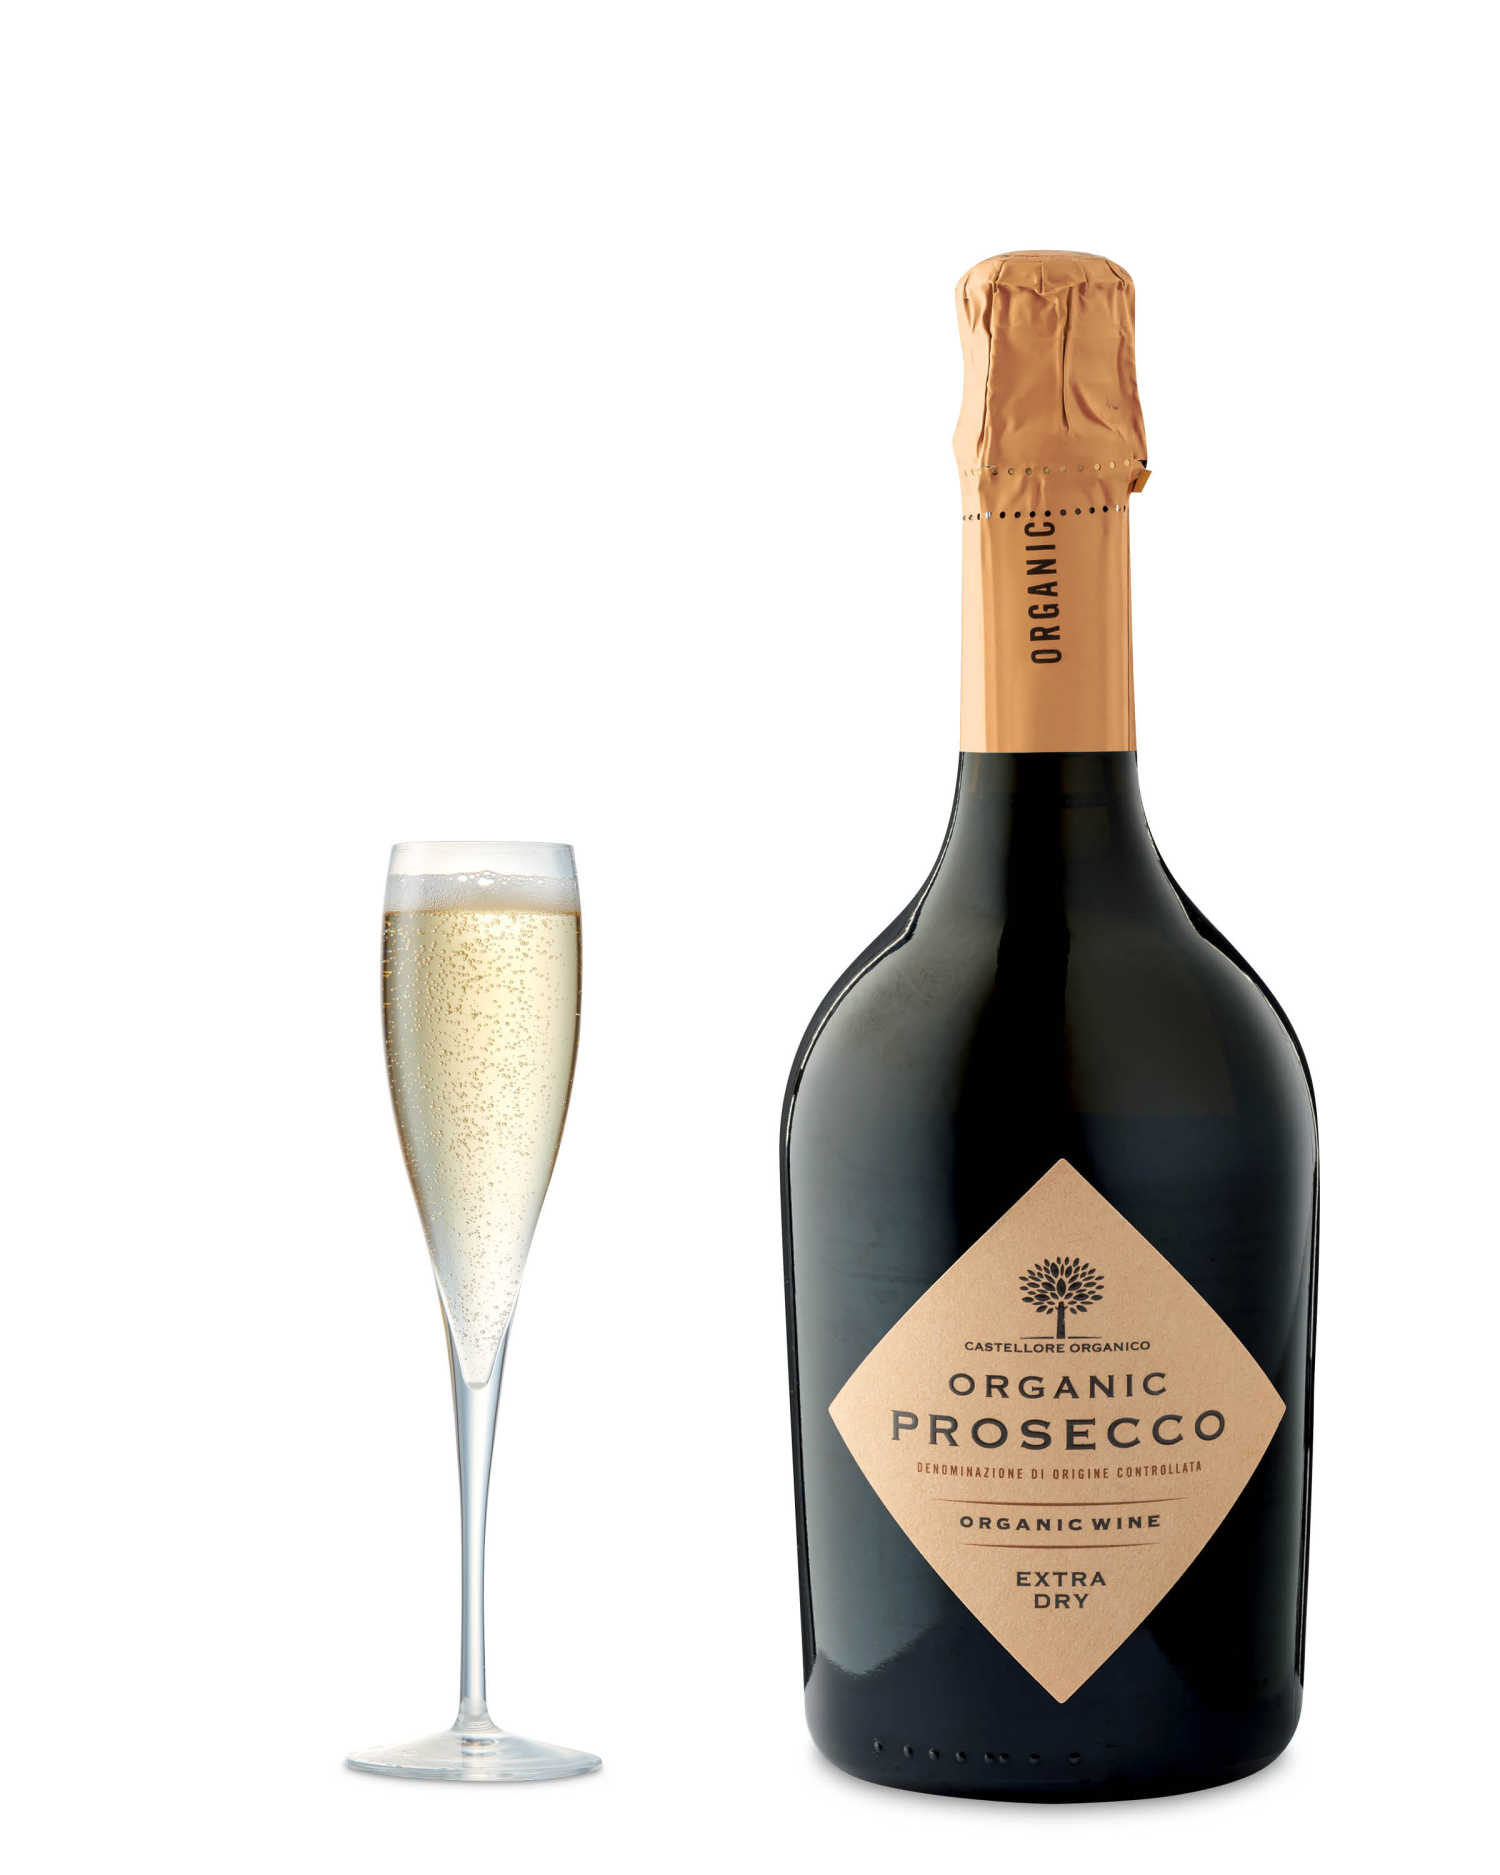 The Drinks We Want to Be Sipping This Festive Season